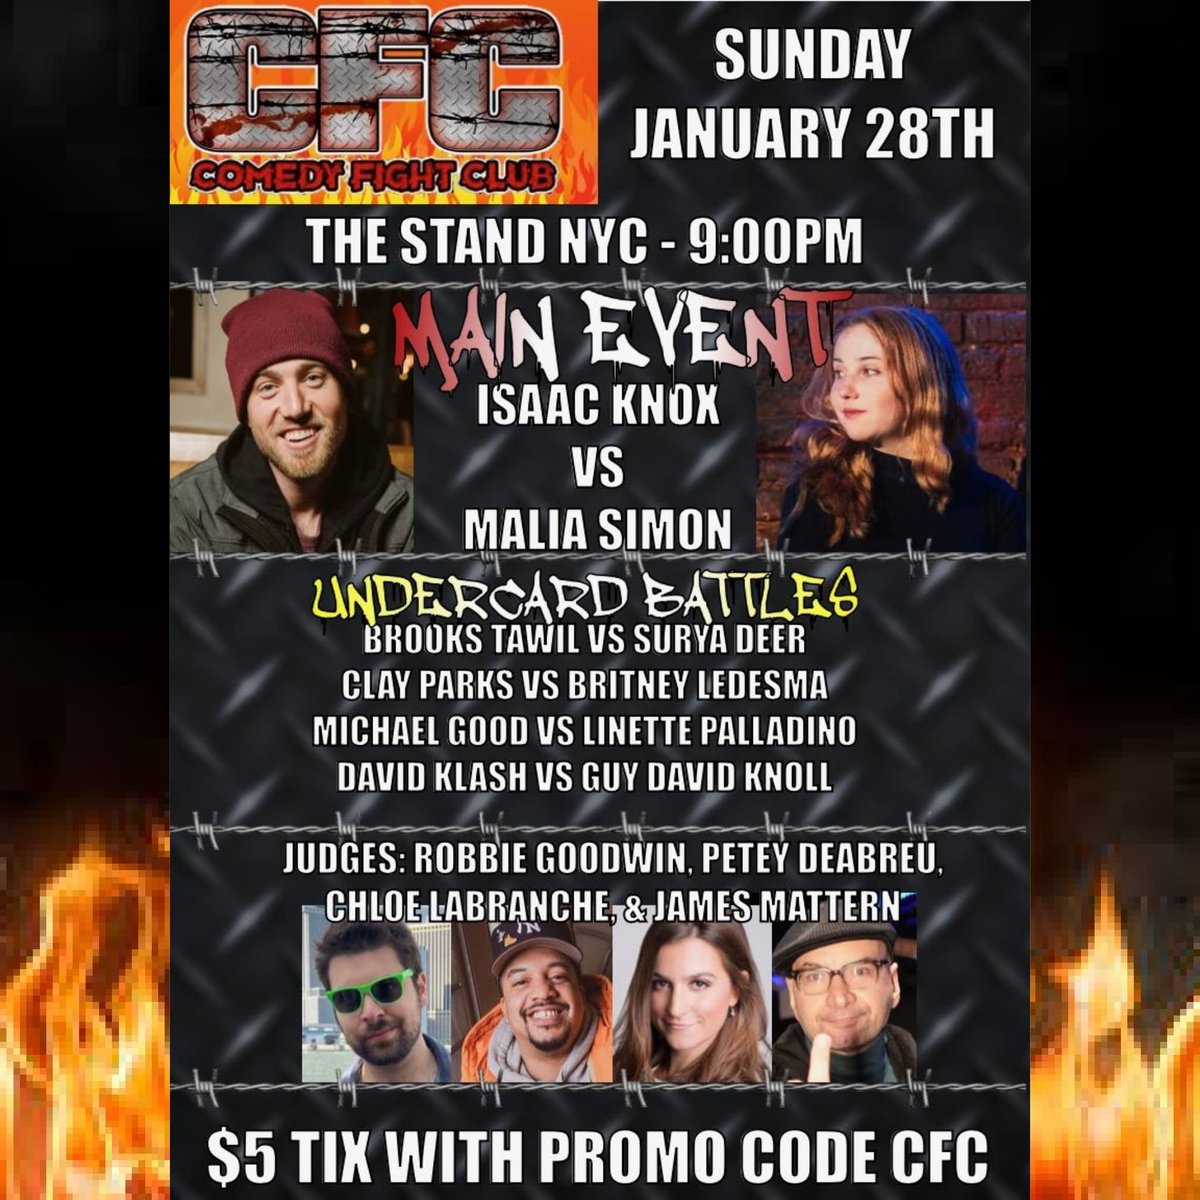 Tonight @TheStandNYC Come on out!!! thestandnyc.com/shows